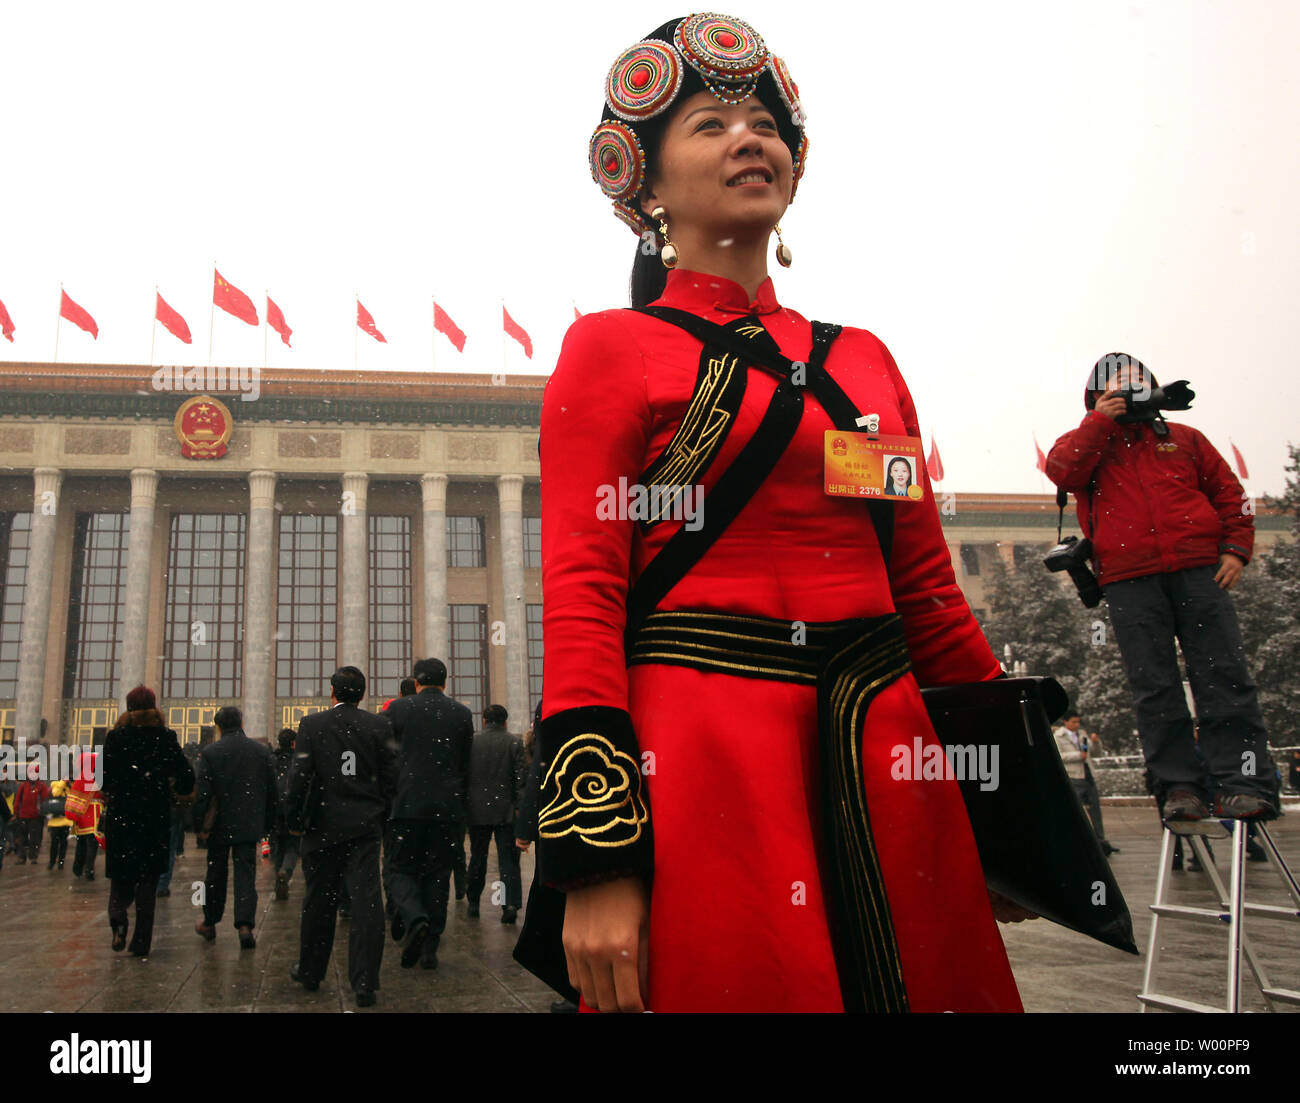 Chinese delegates arrive on Tiananmen Square as China's annual National People's Congress (NPC) gets under way at the Great Hall of the People in Beijing on March 8, 2010.  China's NPC will discuss legislation aimed at the protecting the environment, promoting green energy and ensuring social stability.   UPI/Stephen Shaver Stock Photo